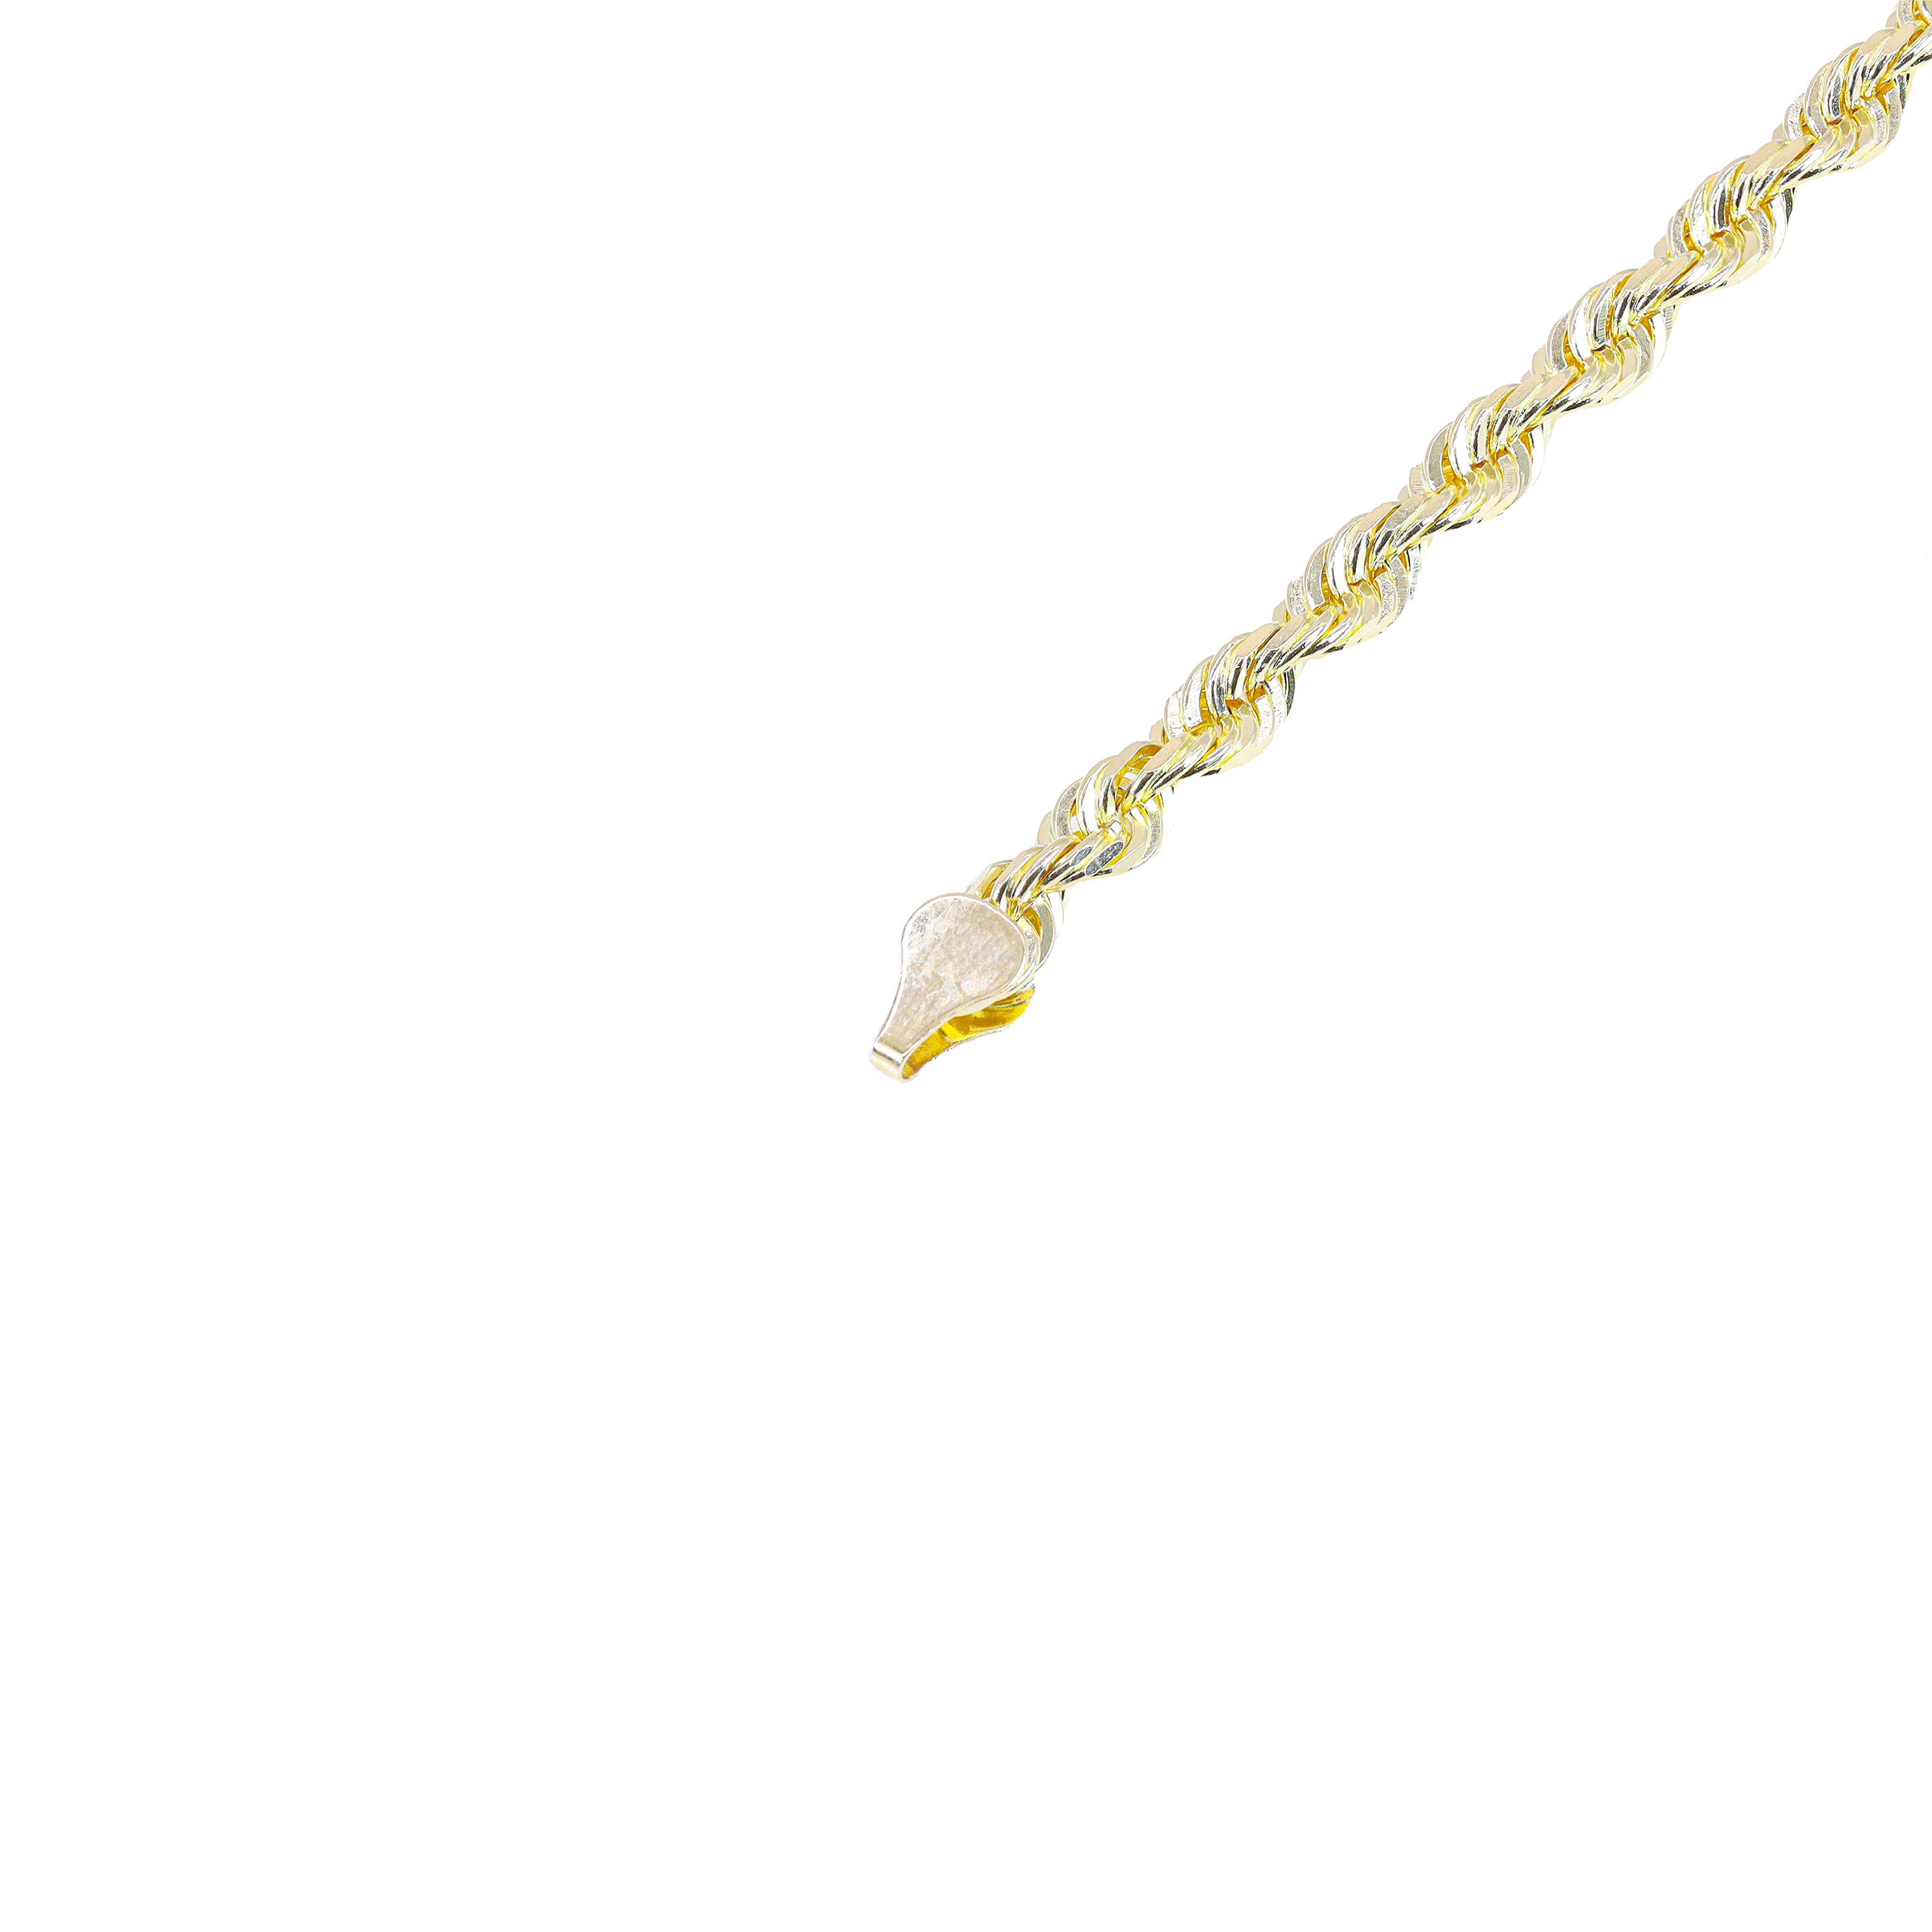 10KT Semi-Solid Rope Yellow Gold Chain